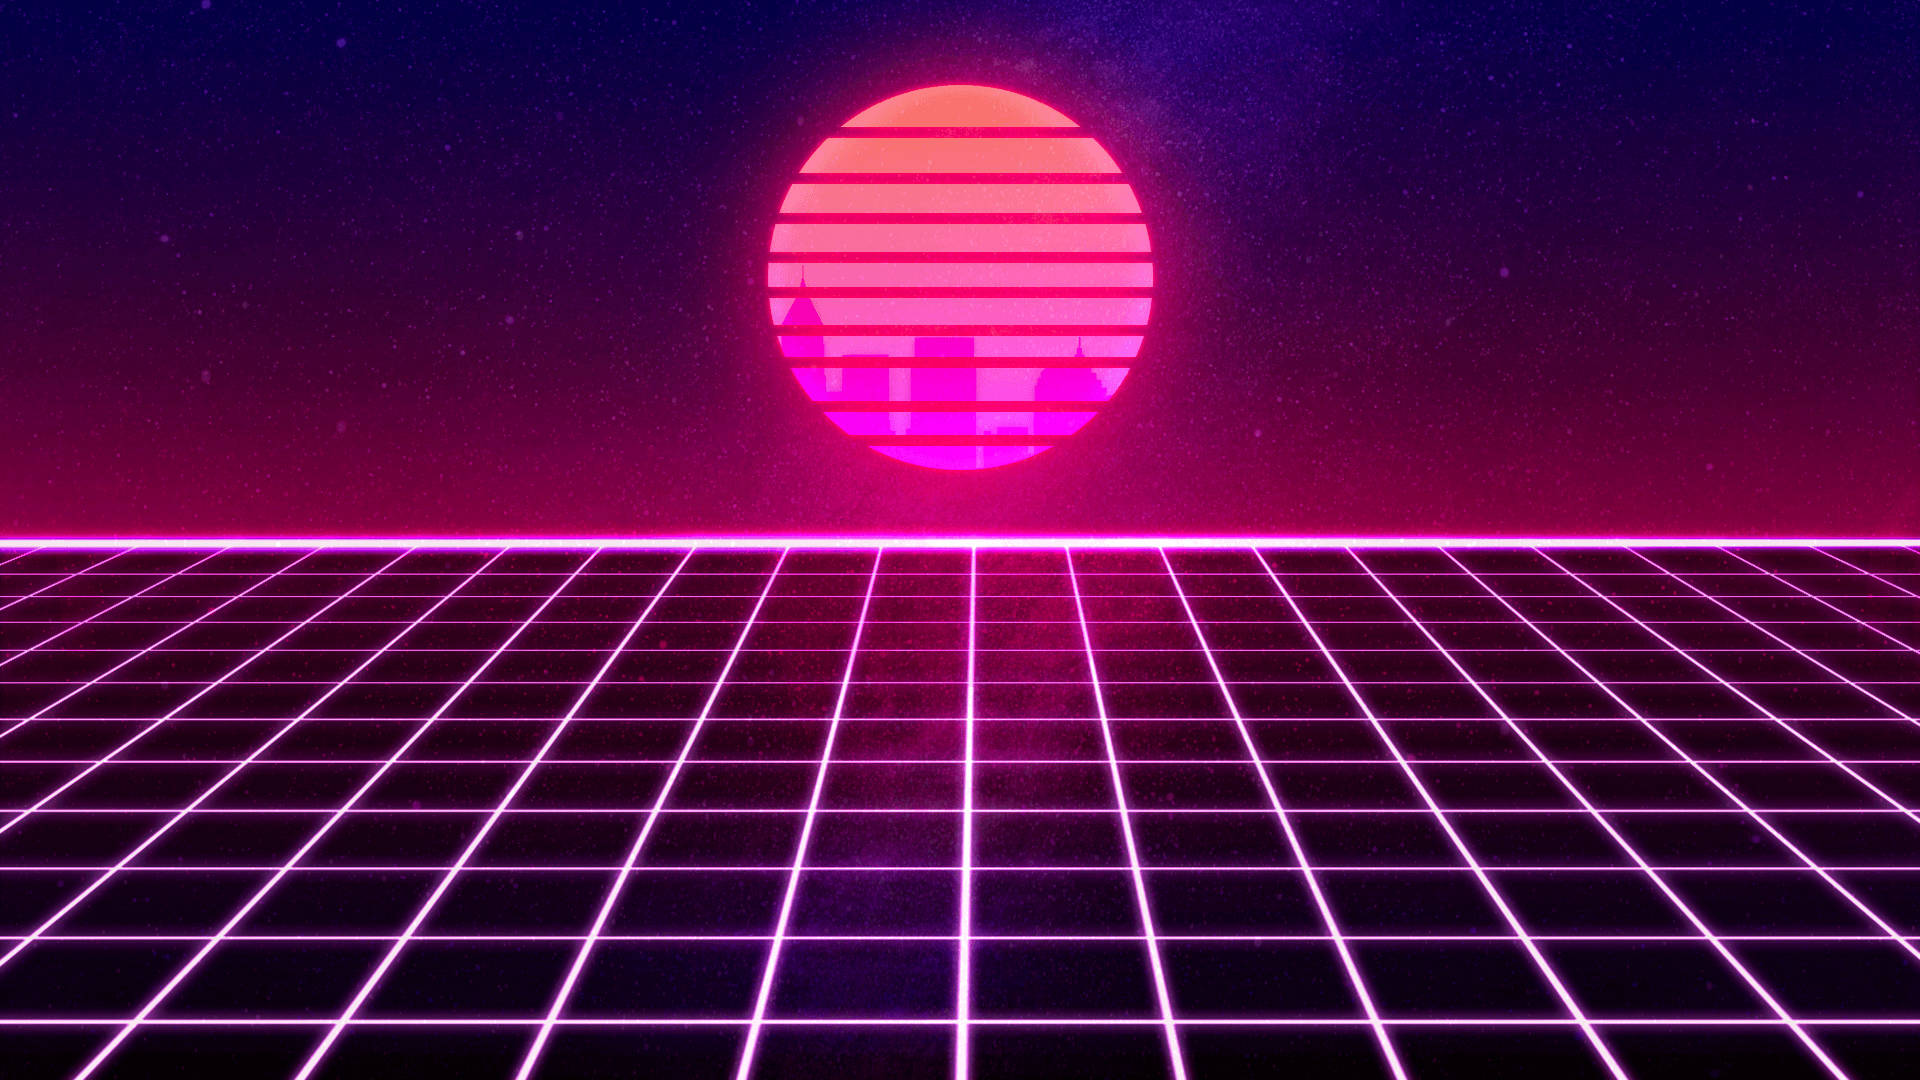 "2019 is about to go retro! Groove to the 80s vibe." Wallpaper